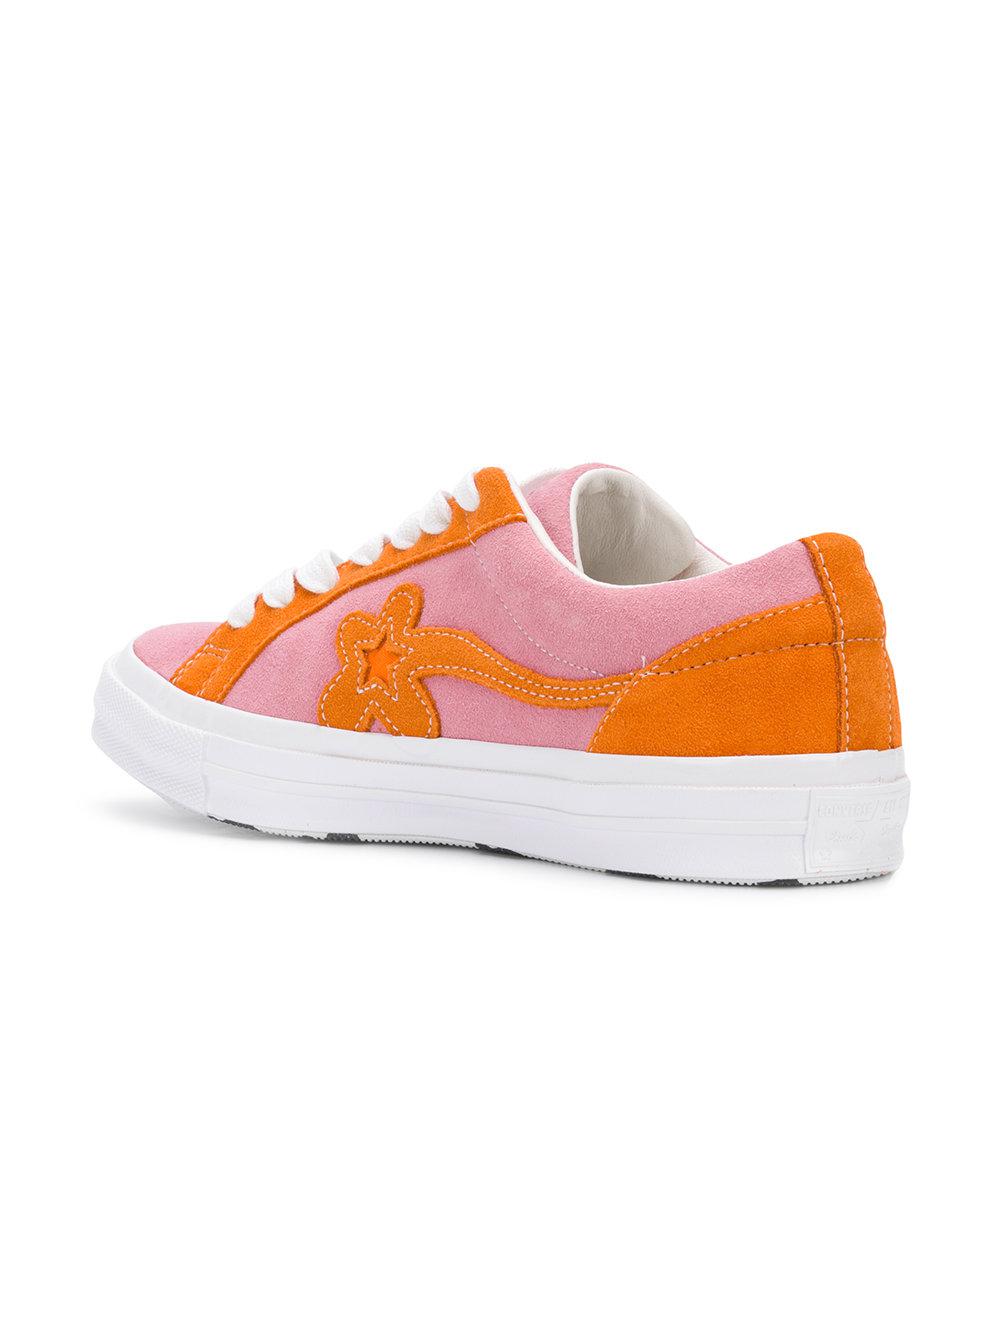 Converse Floral Embellished Sneakers in Pink | Lyst